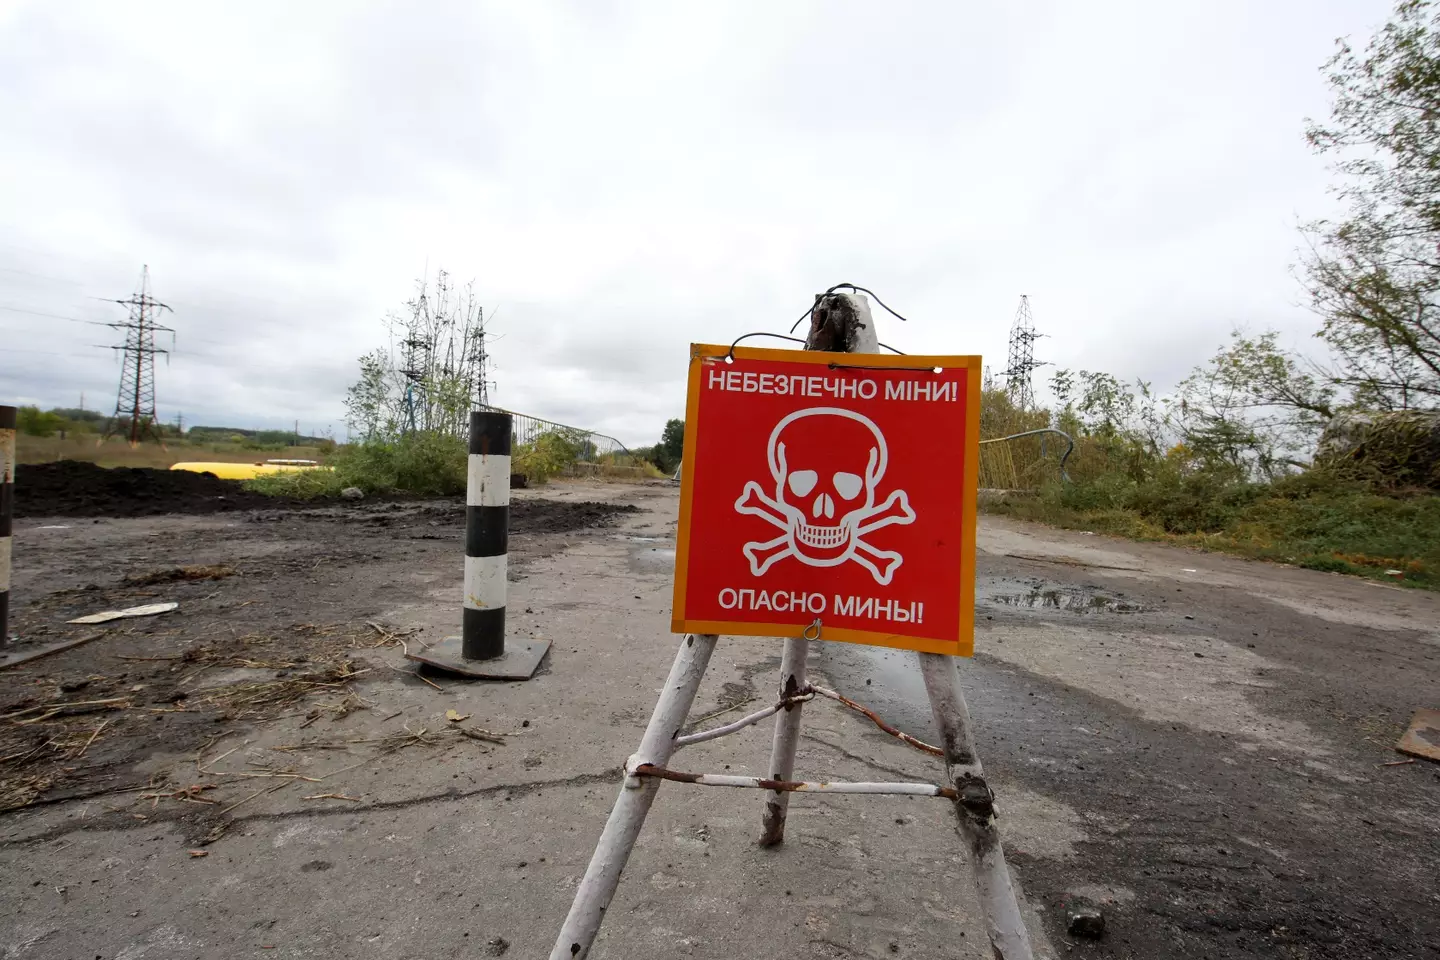 Russian mines have killed hundreds of people in Ukraine.